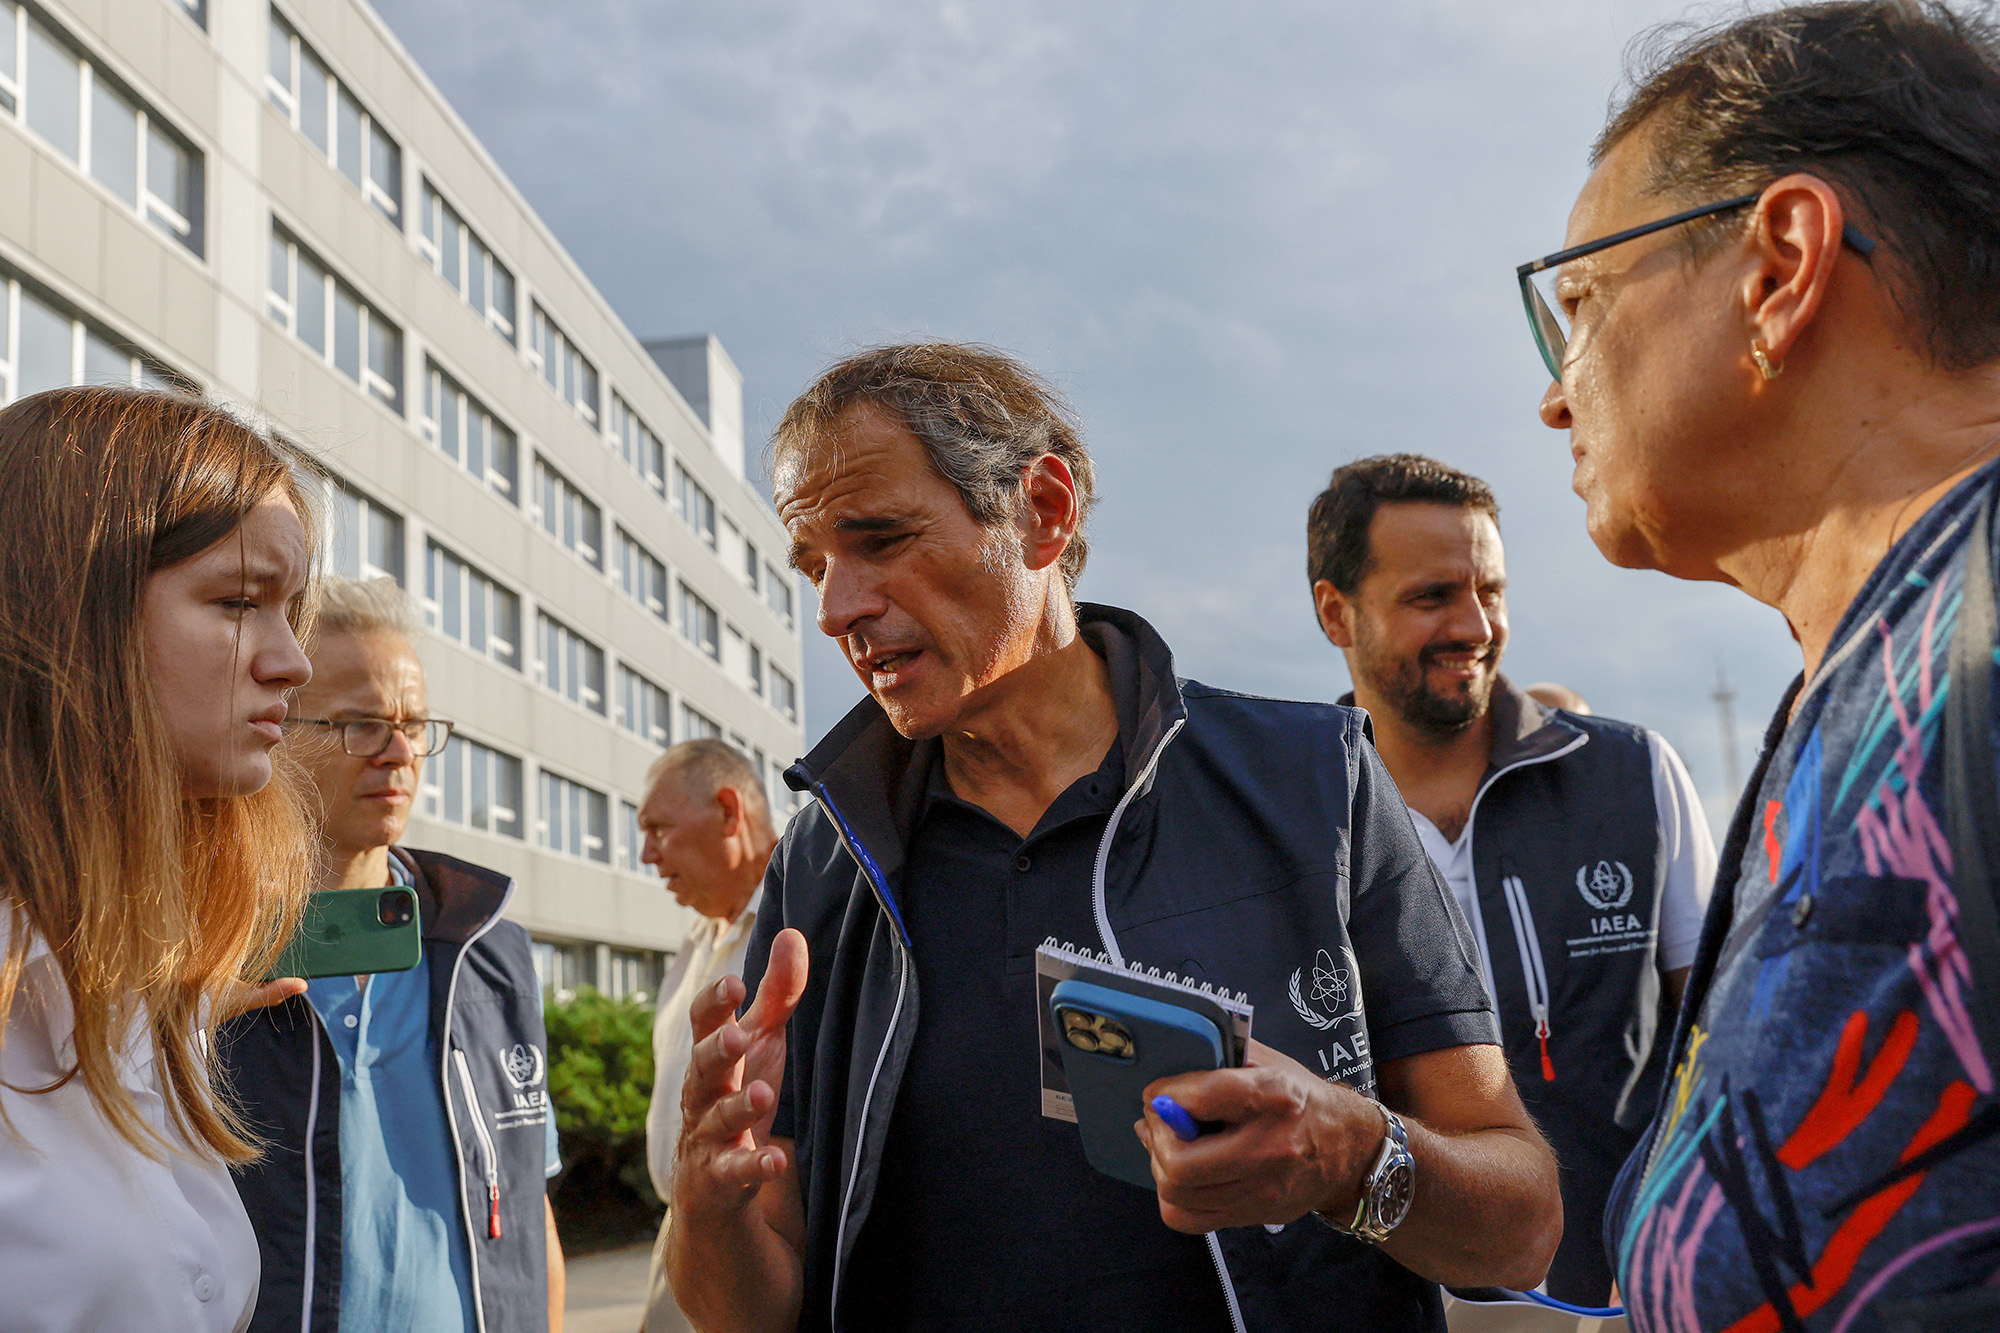 Members of the International Atomic Energy Agency (IAEA) expert mission, led by IAEA Director-General Rafael Grossi, center, meet with journalists at the Russian-controlled Zaporizhzhia nuclear power plant, Ukraine, on September 1.